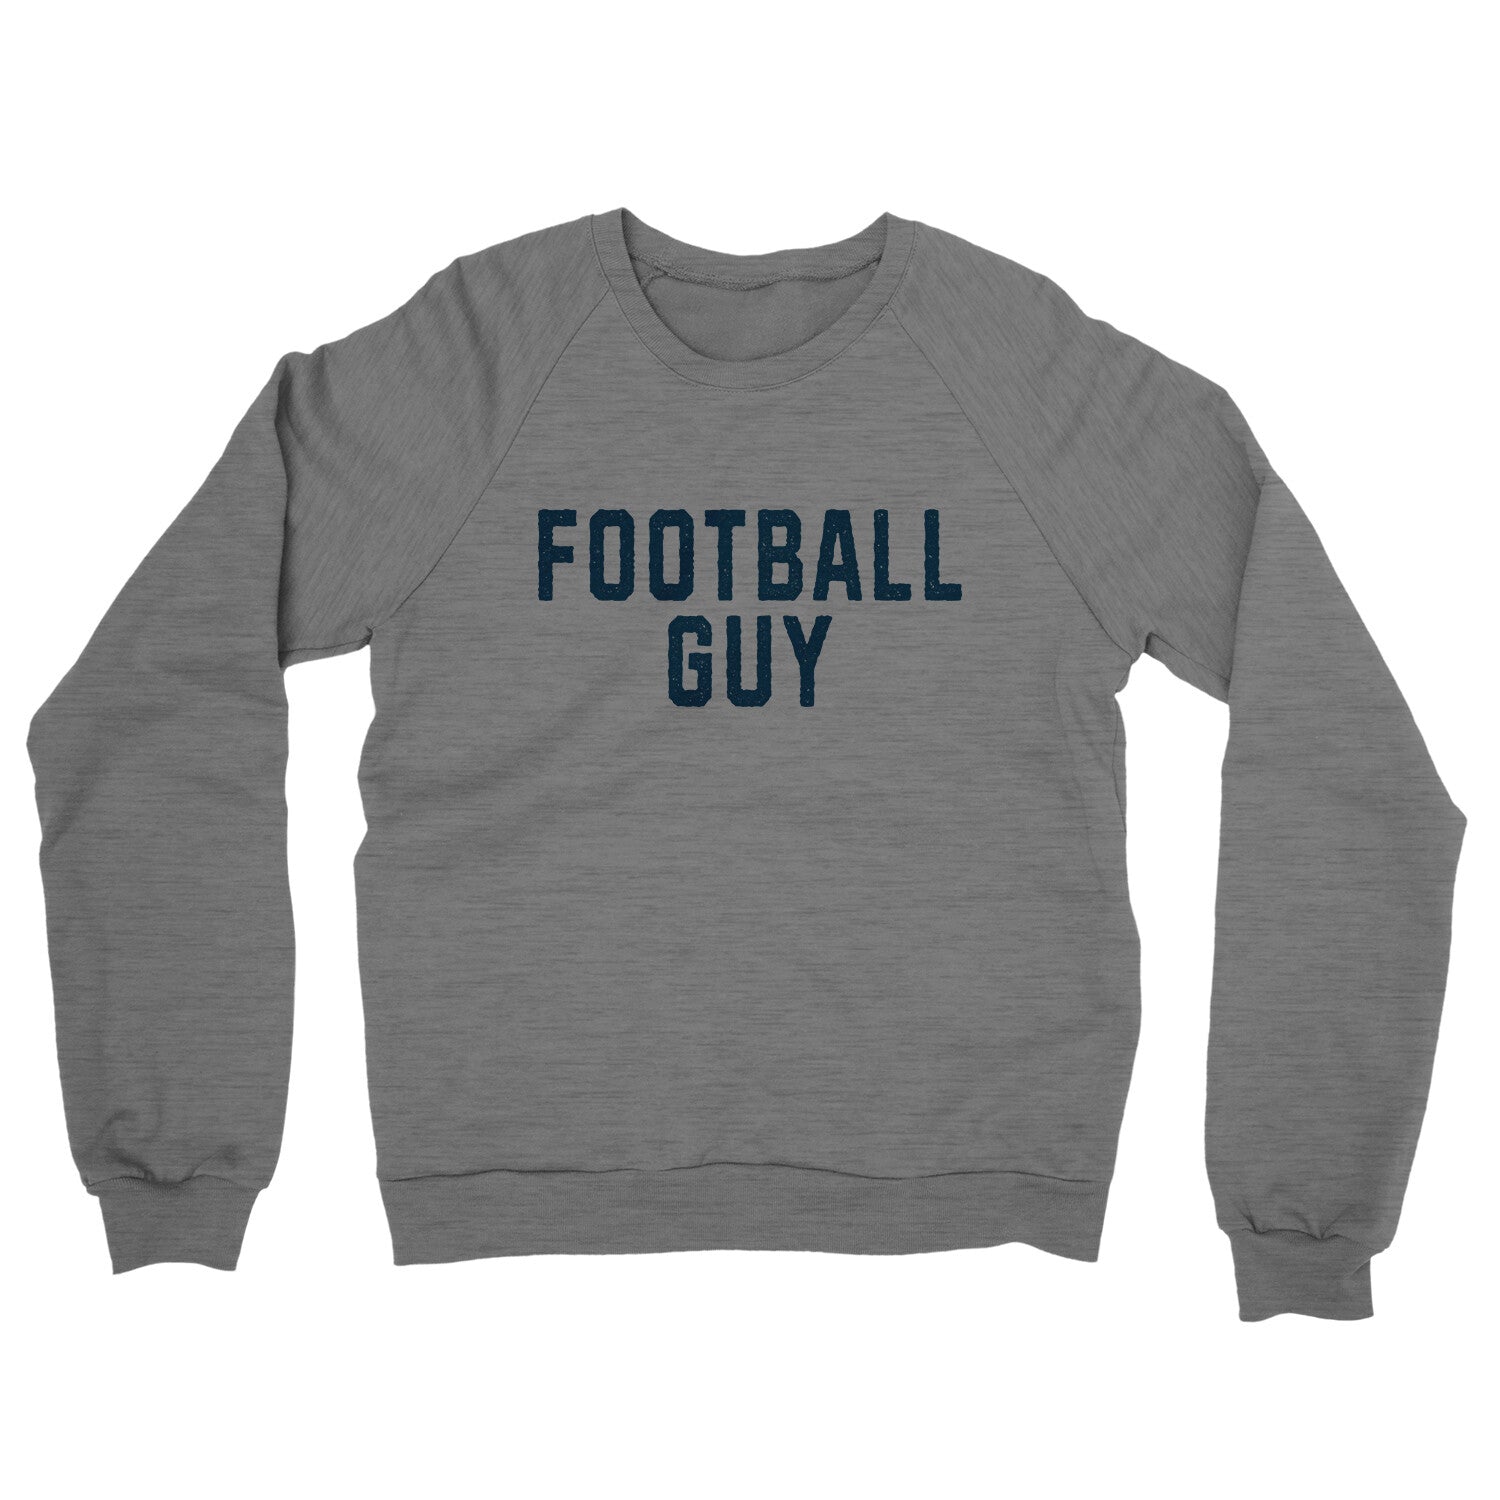 Football Guy in Graphite Heather Color